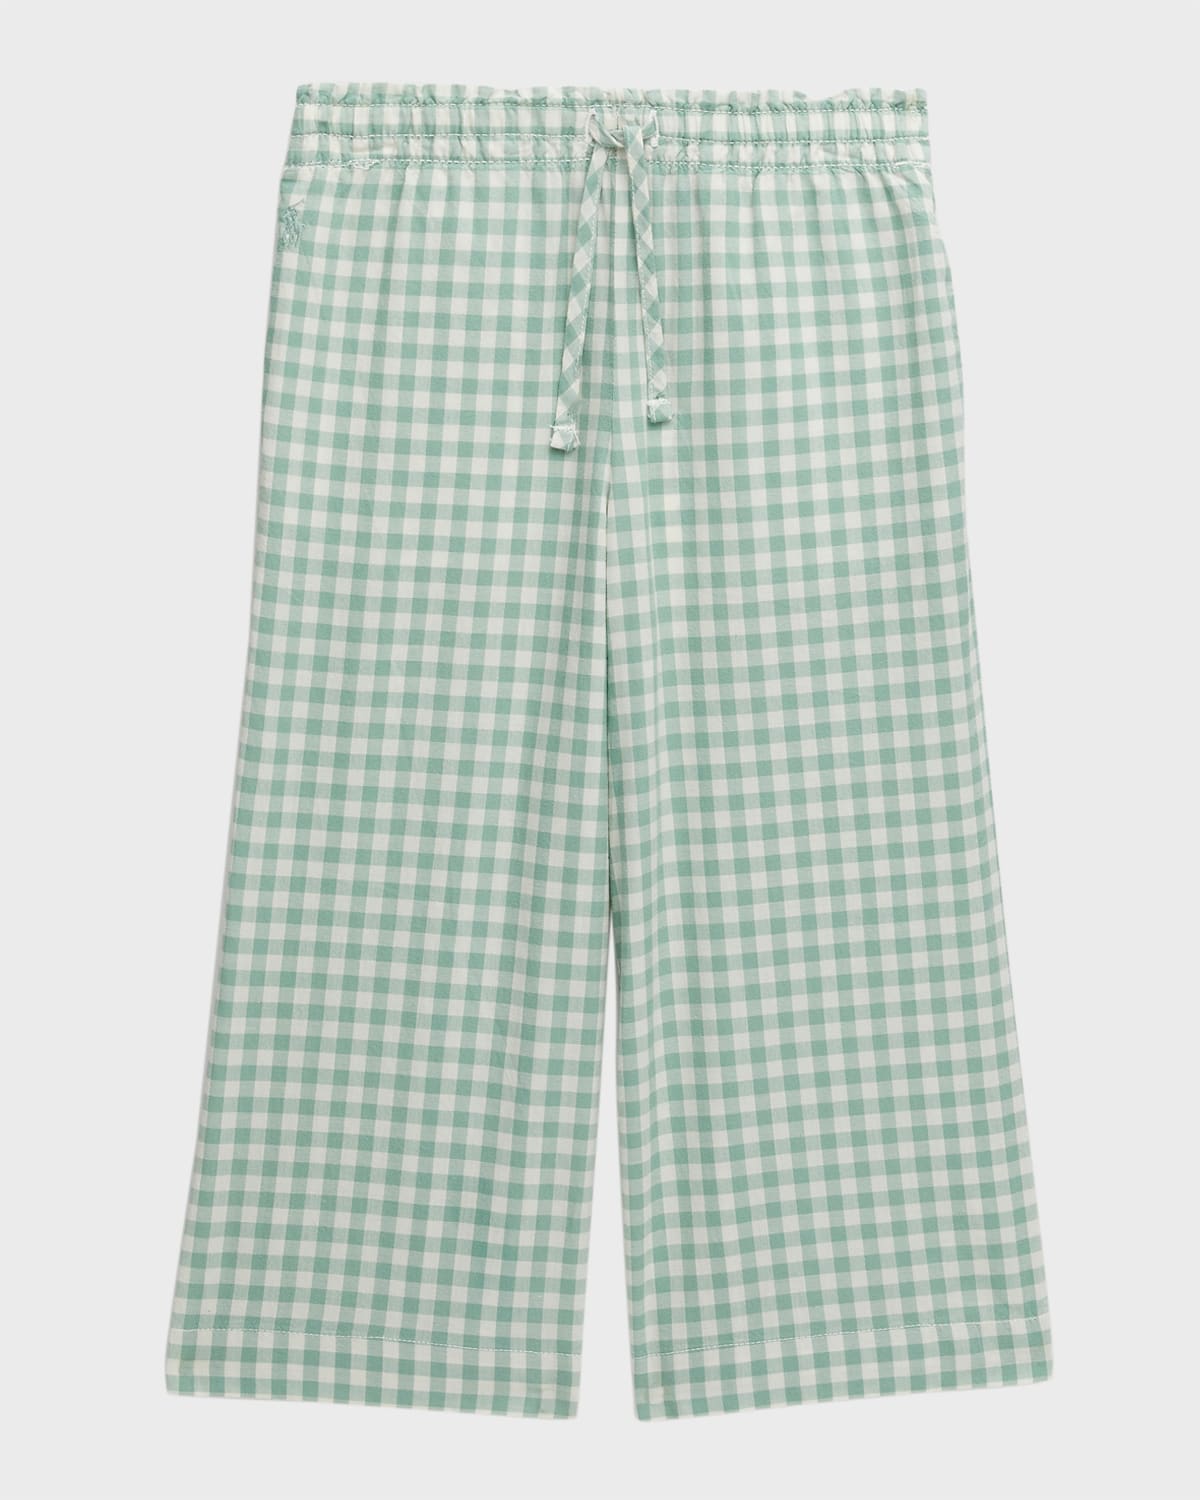 Girl's Gingham-Print Cropped Pants, Size 8-16